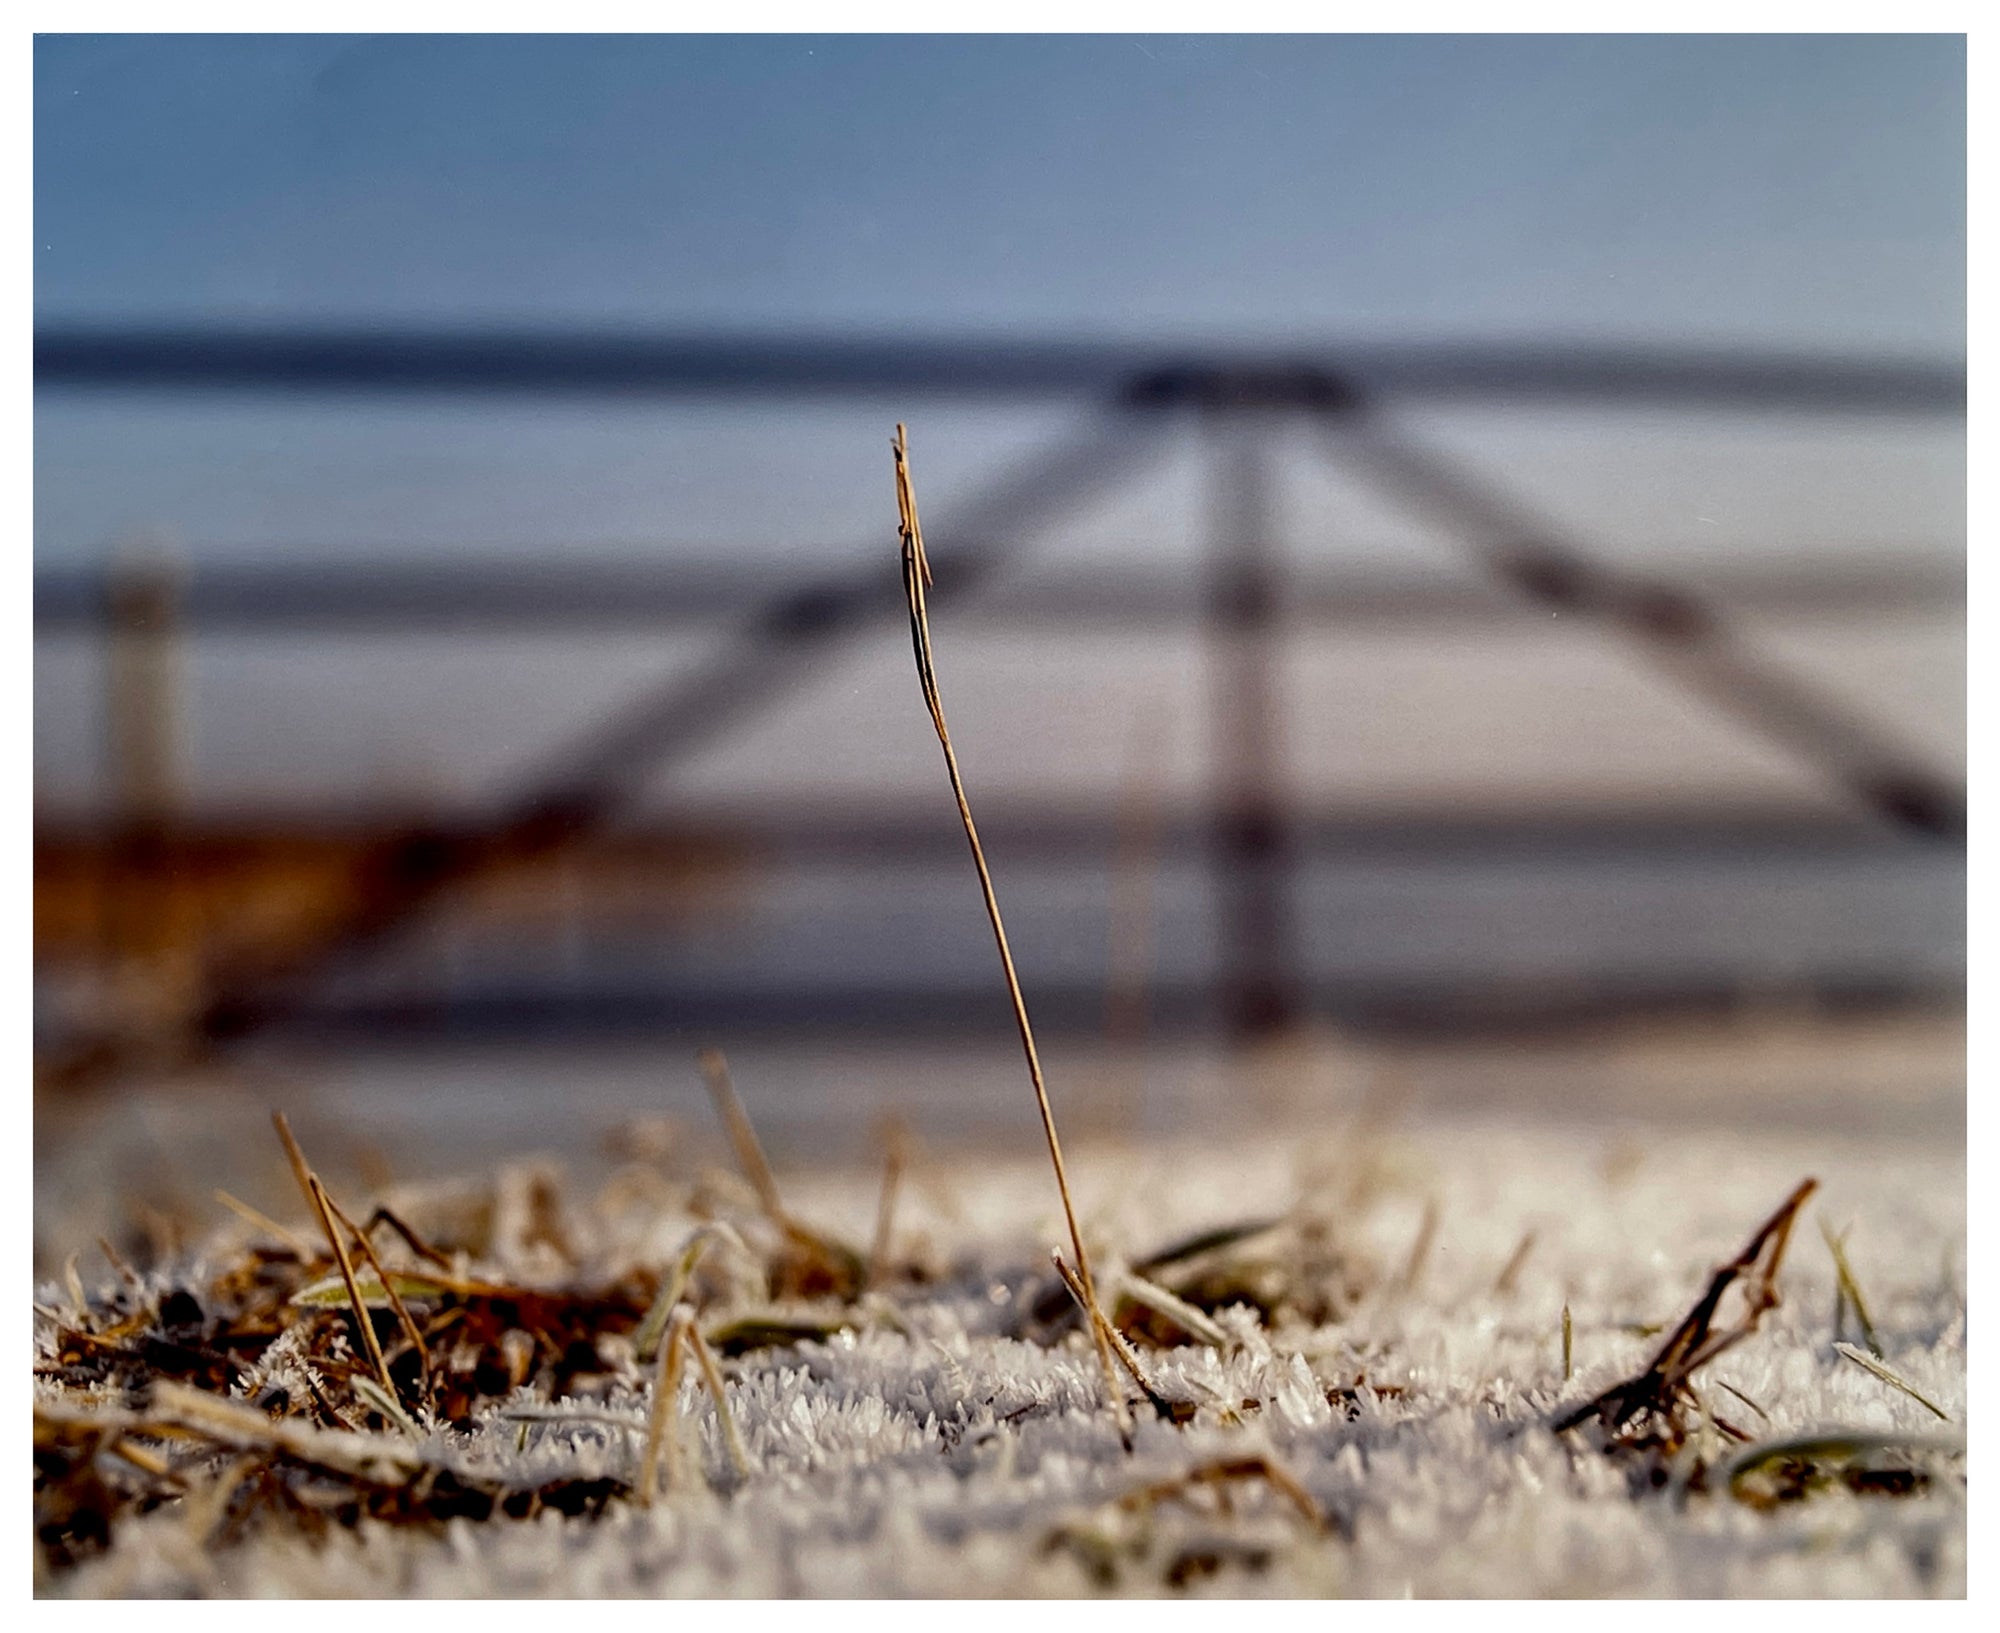 Photograph by Richard Heeps. A prominent piece of stubble on a snowy field, framed by a wooden gate. 